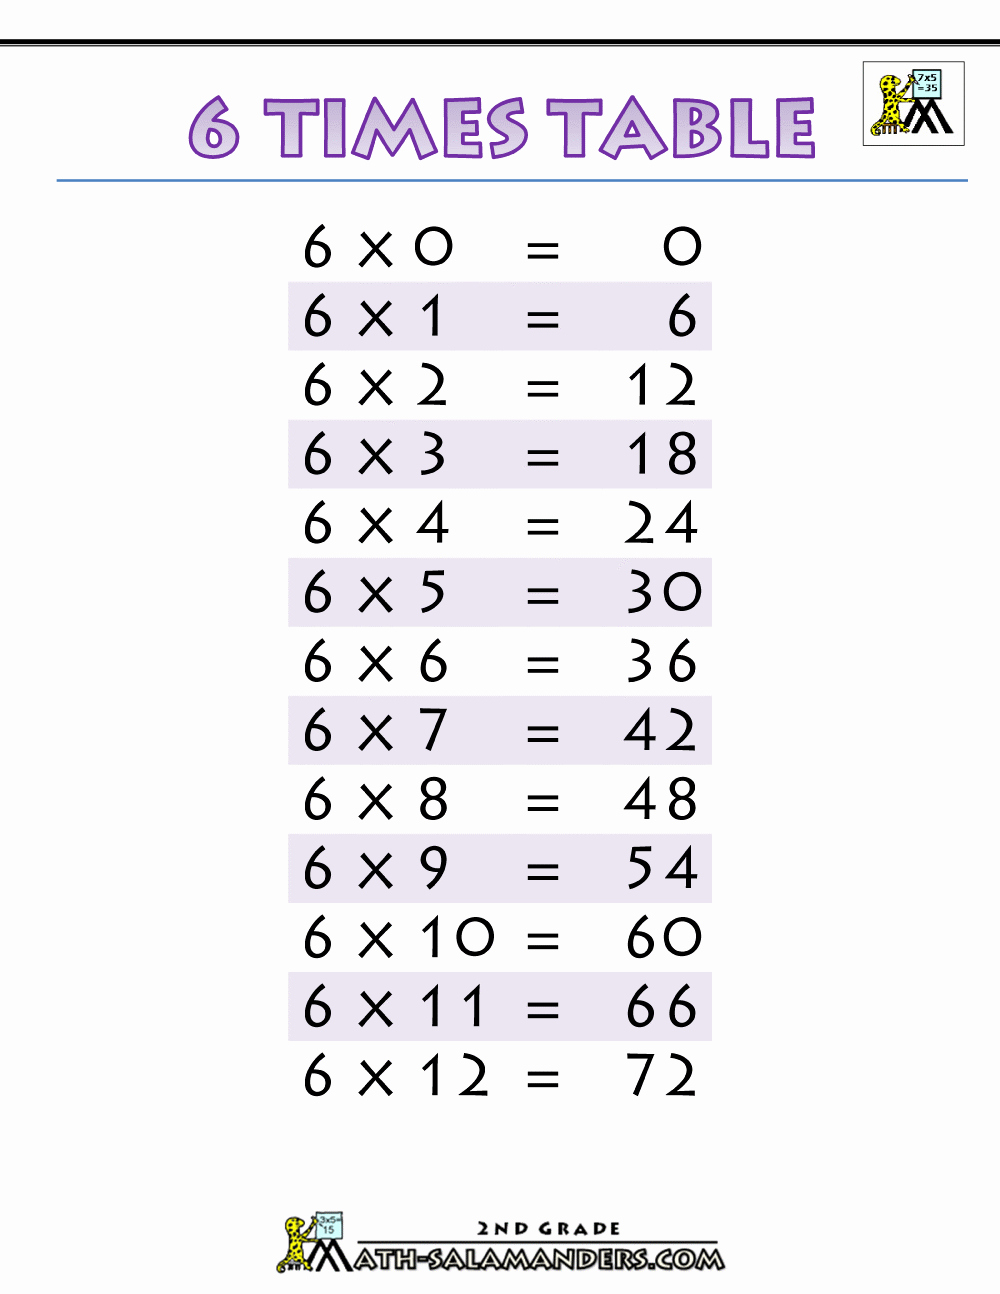 6 Times Table Worksheet Best Of 6 Times Table